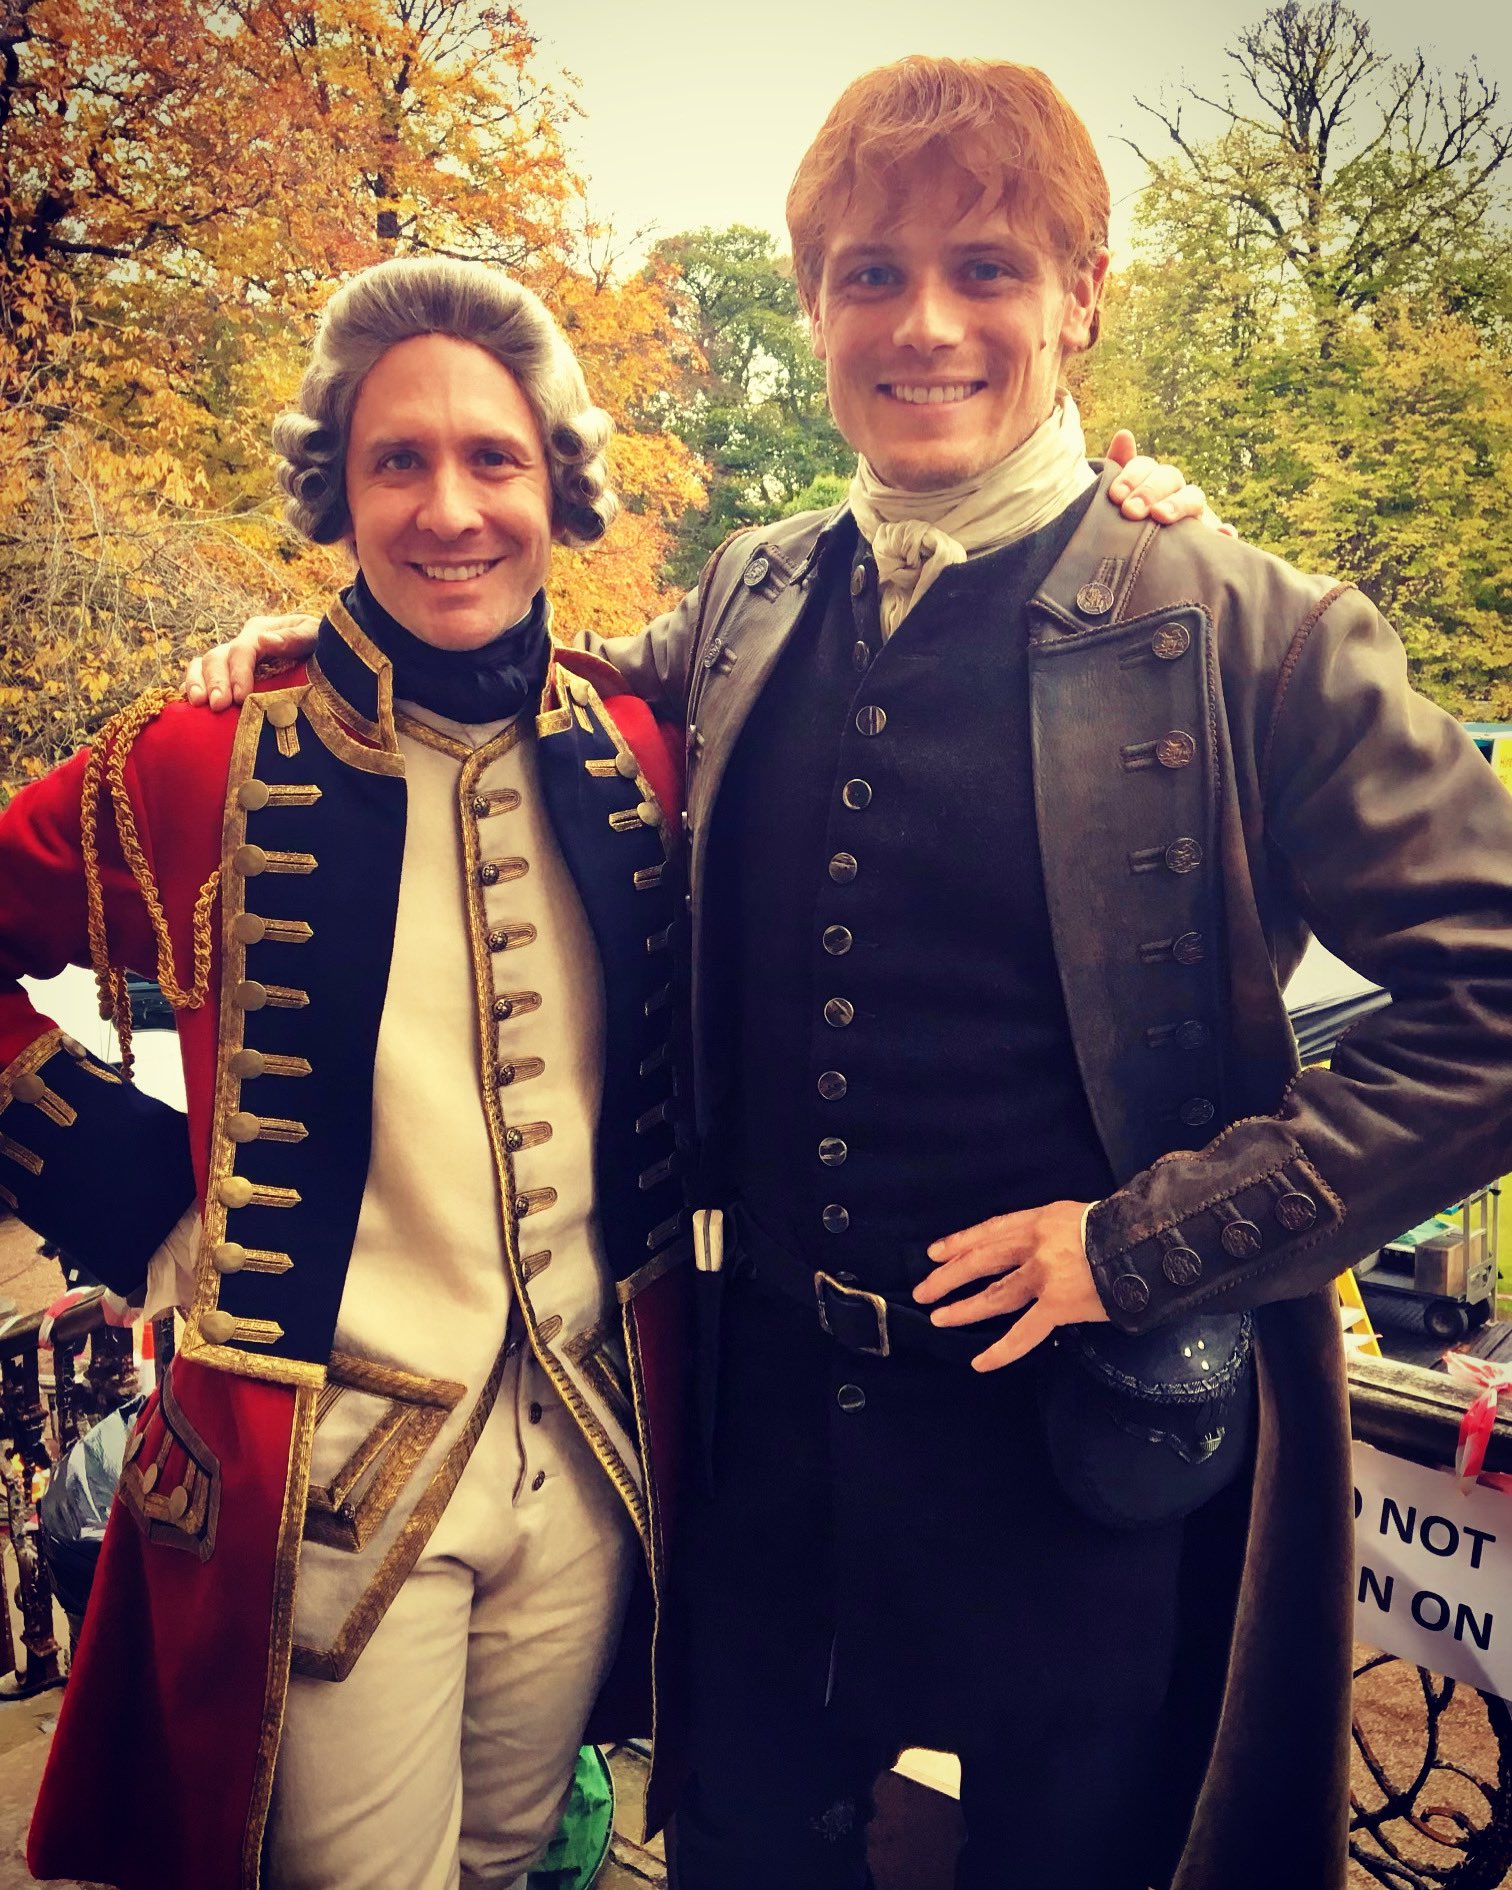 Tim Downie on "Happy #WorldOutlanderDay! Thought a photo of my first ever on set years ago would rather fitting. Immense amounts of gratitude for being a part of